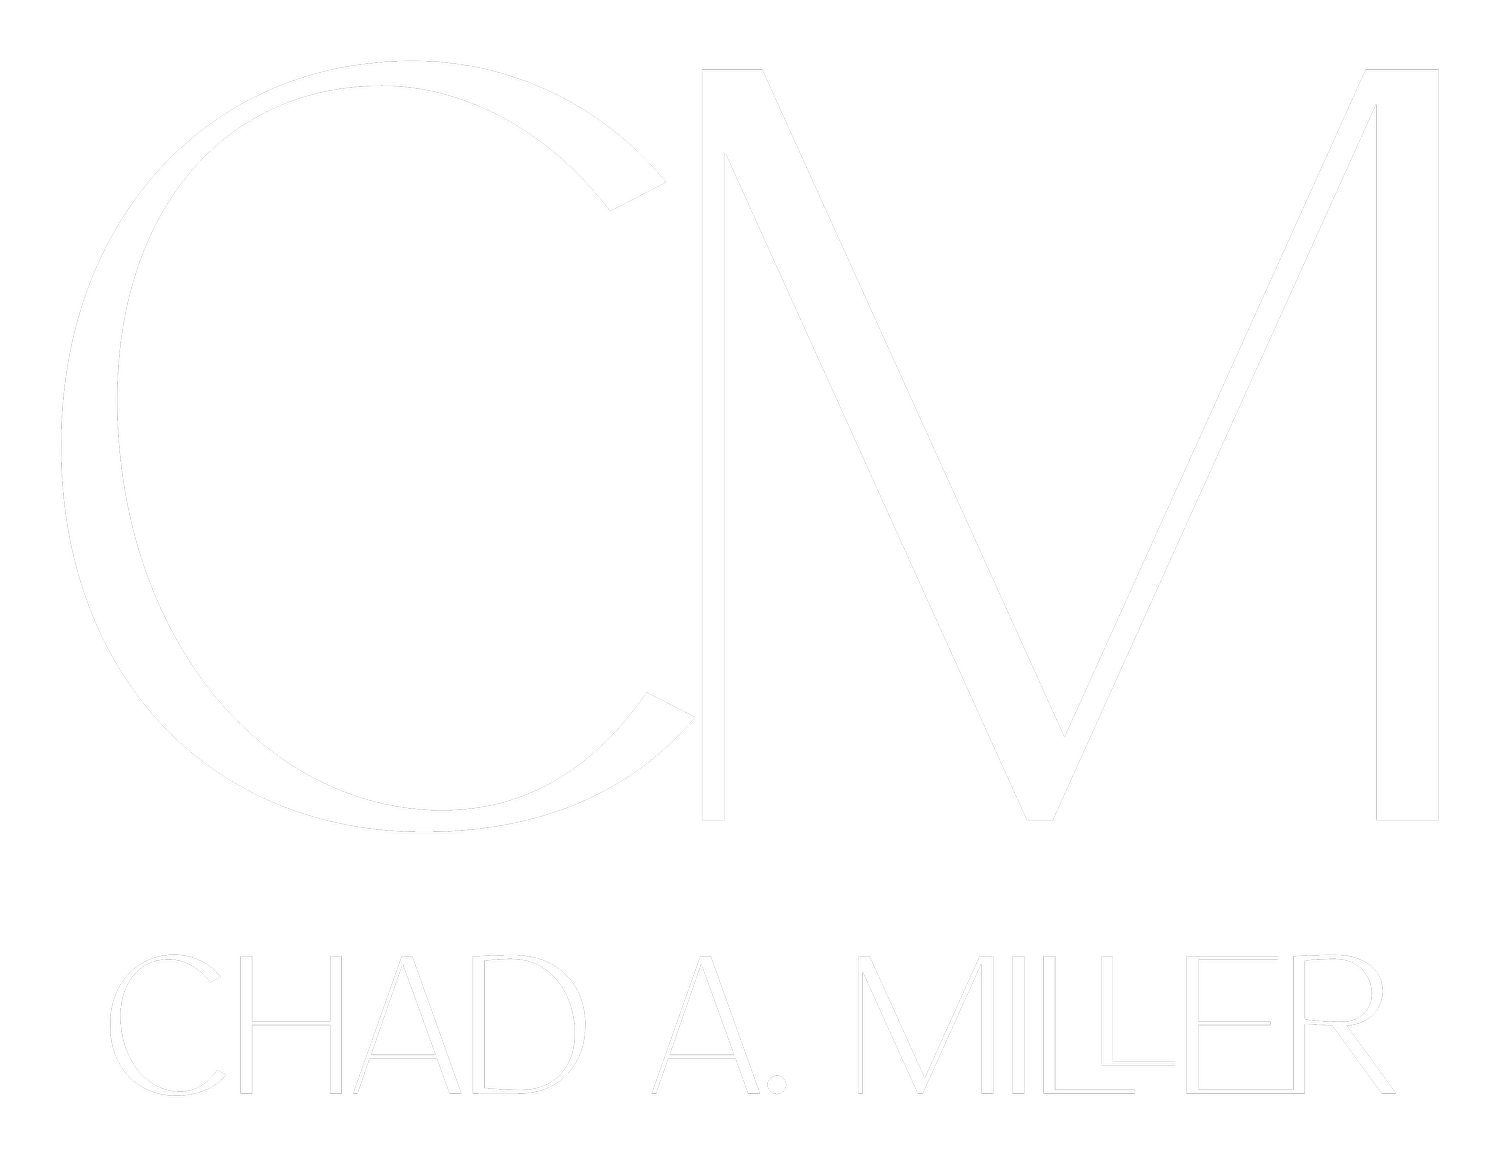 Chad A. Miller